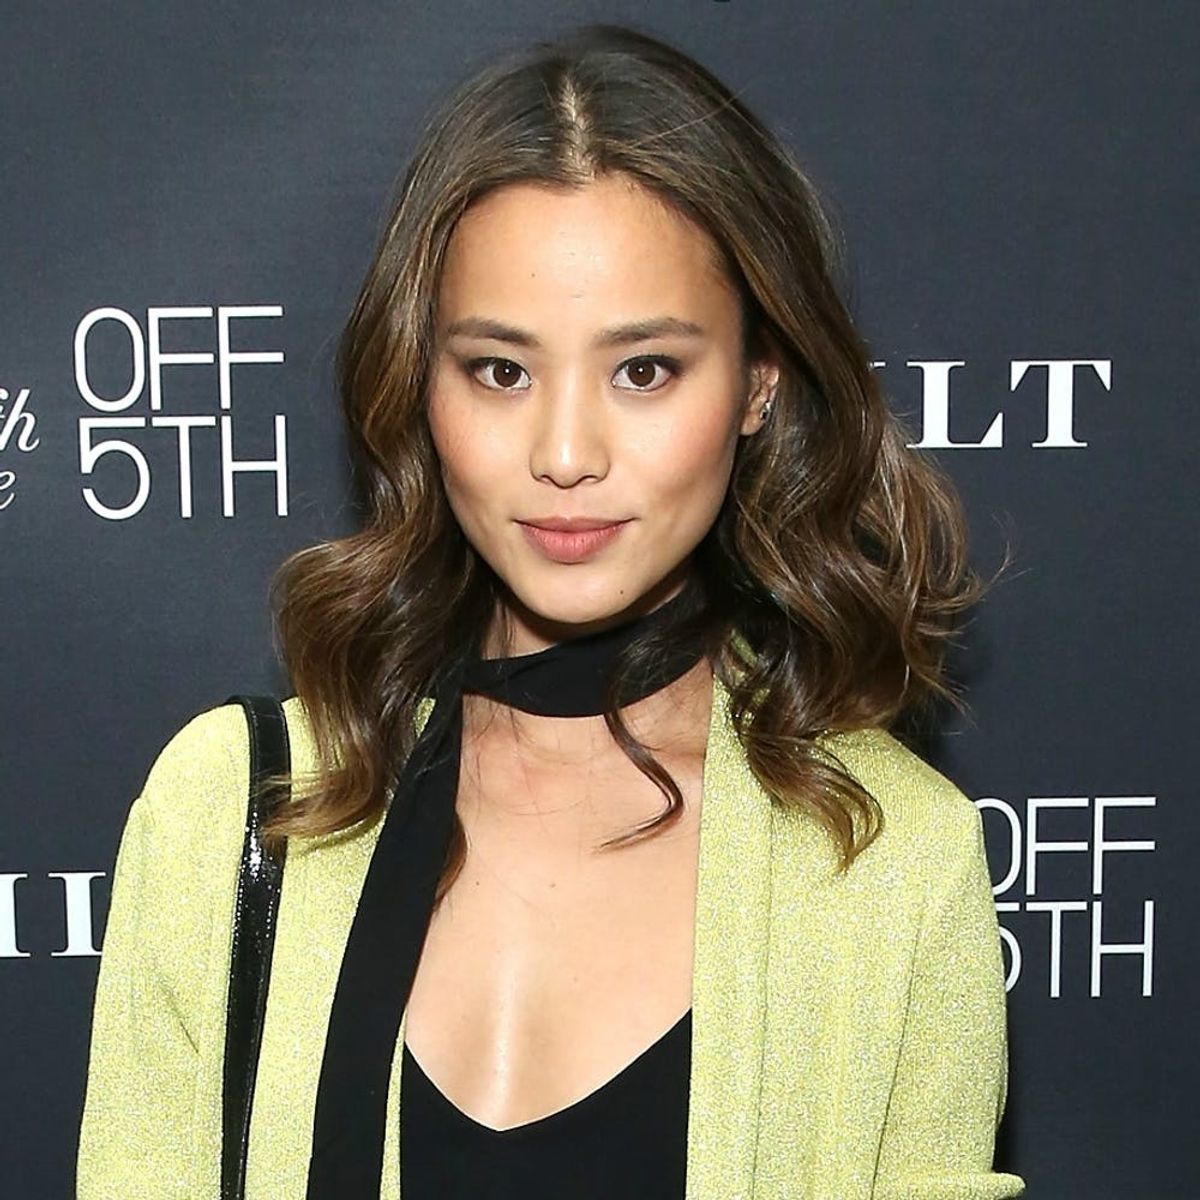 Jamie Chung Puts a Creative New Spin on the Flower Crown